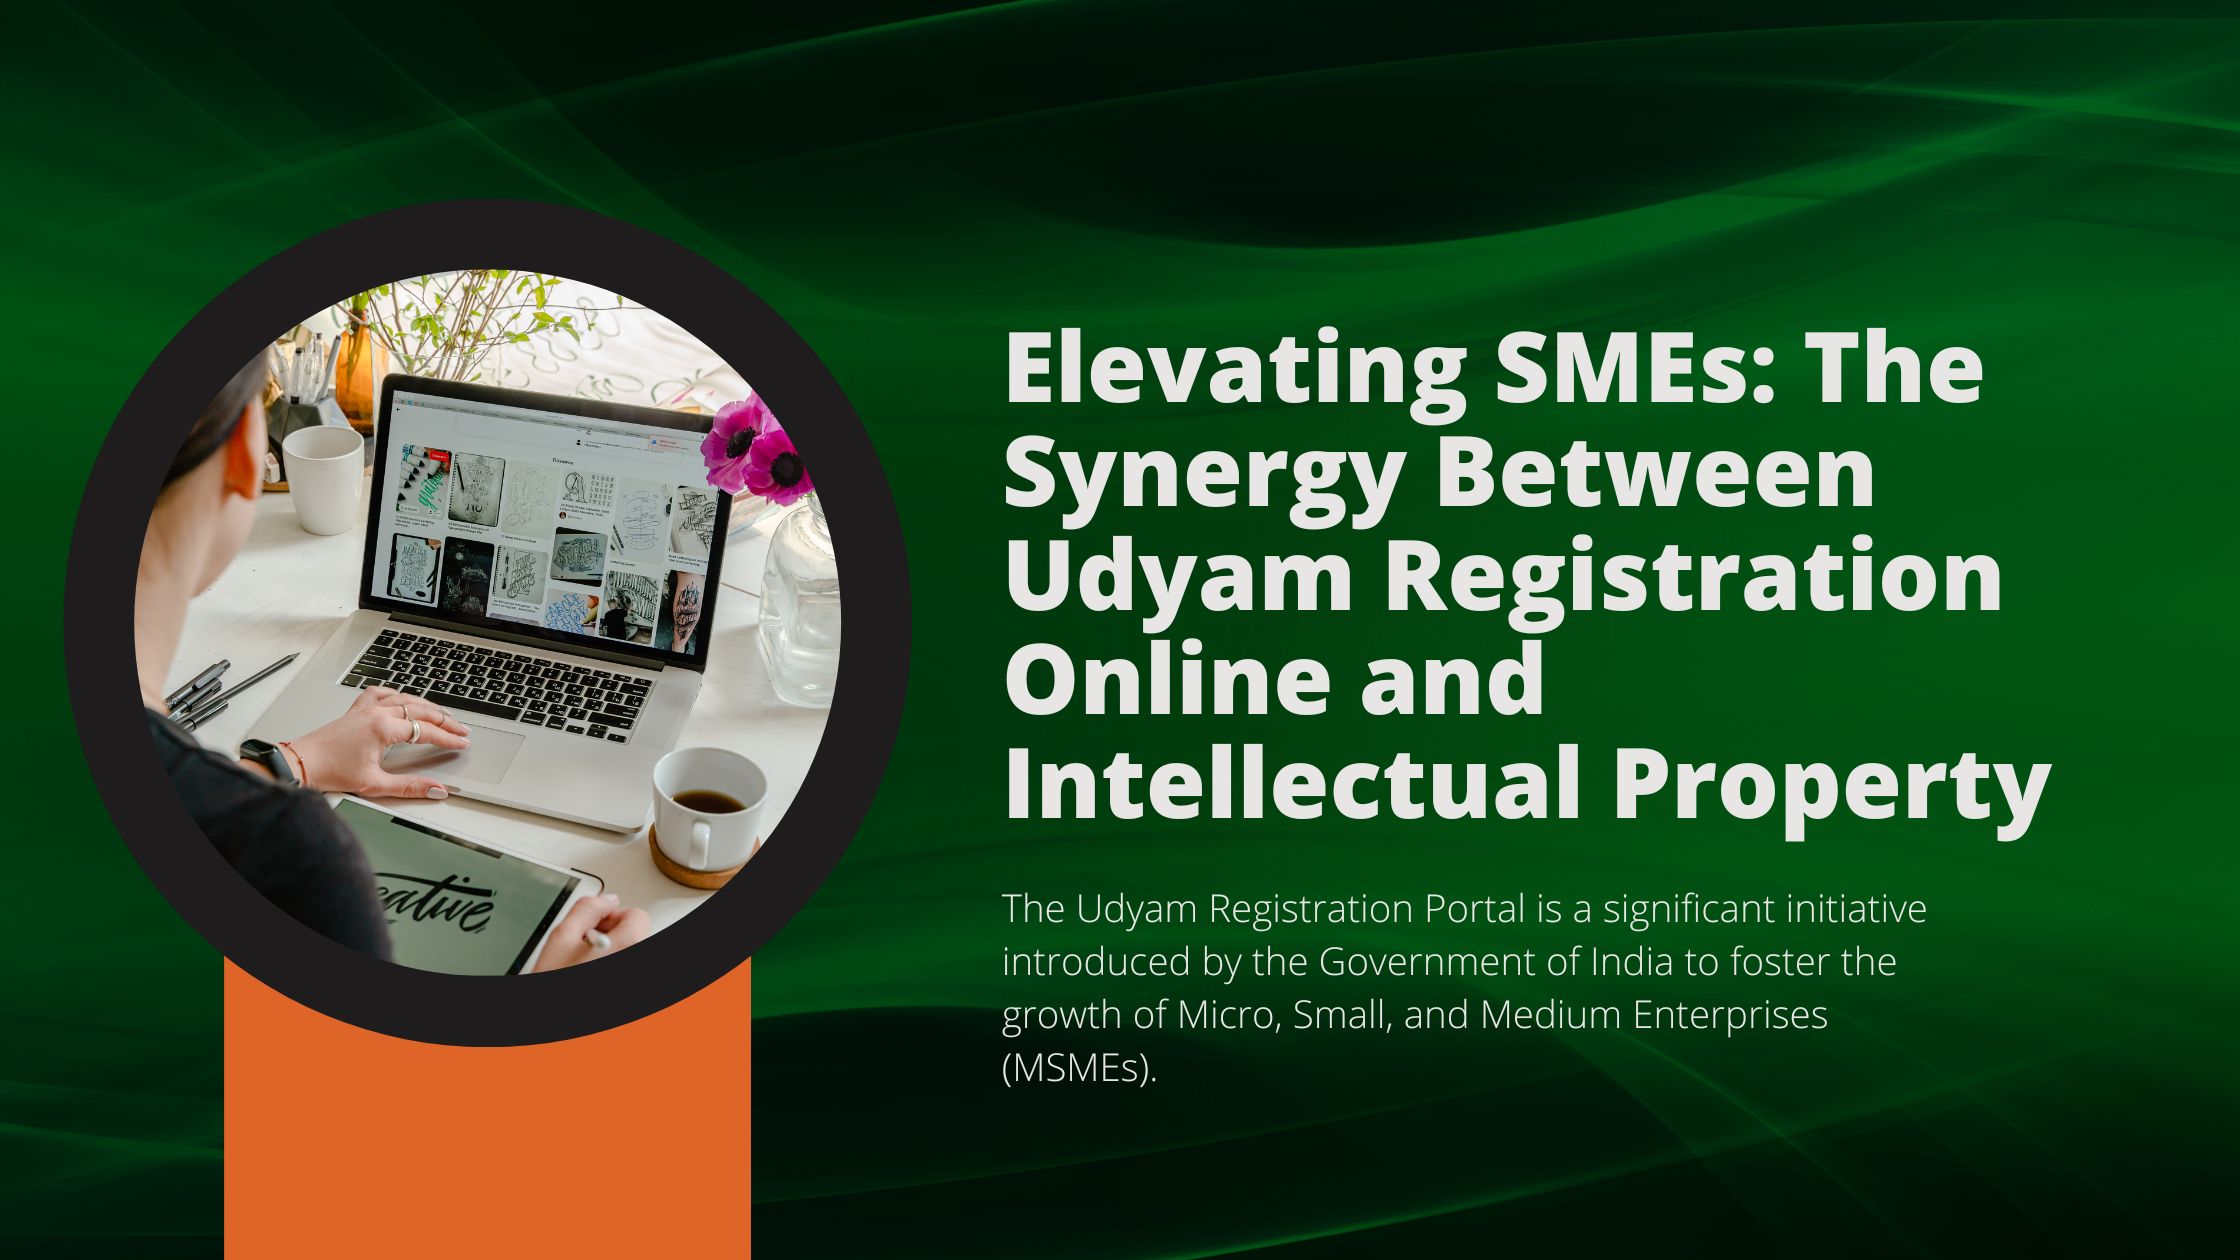 Elevating SMEs: The Synergy Between Udyam Registration Online and Intellectual Property